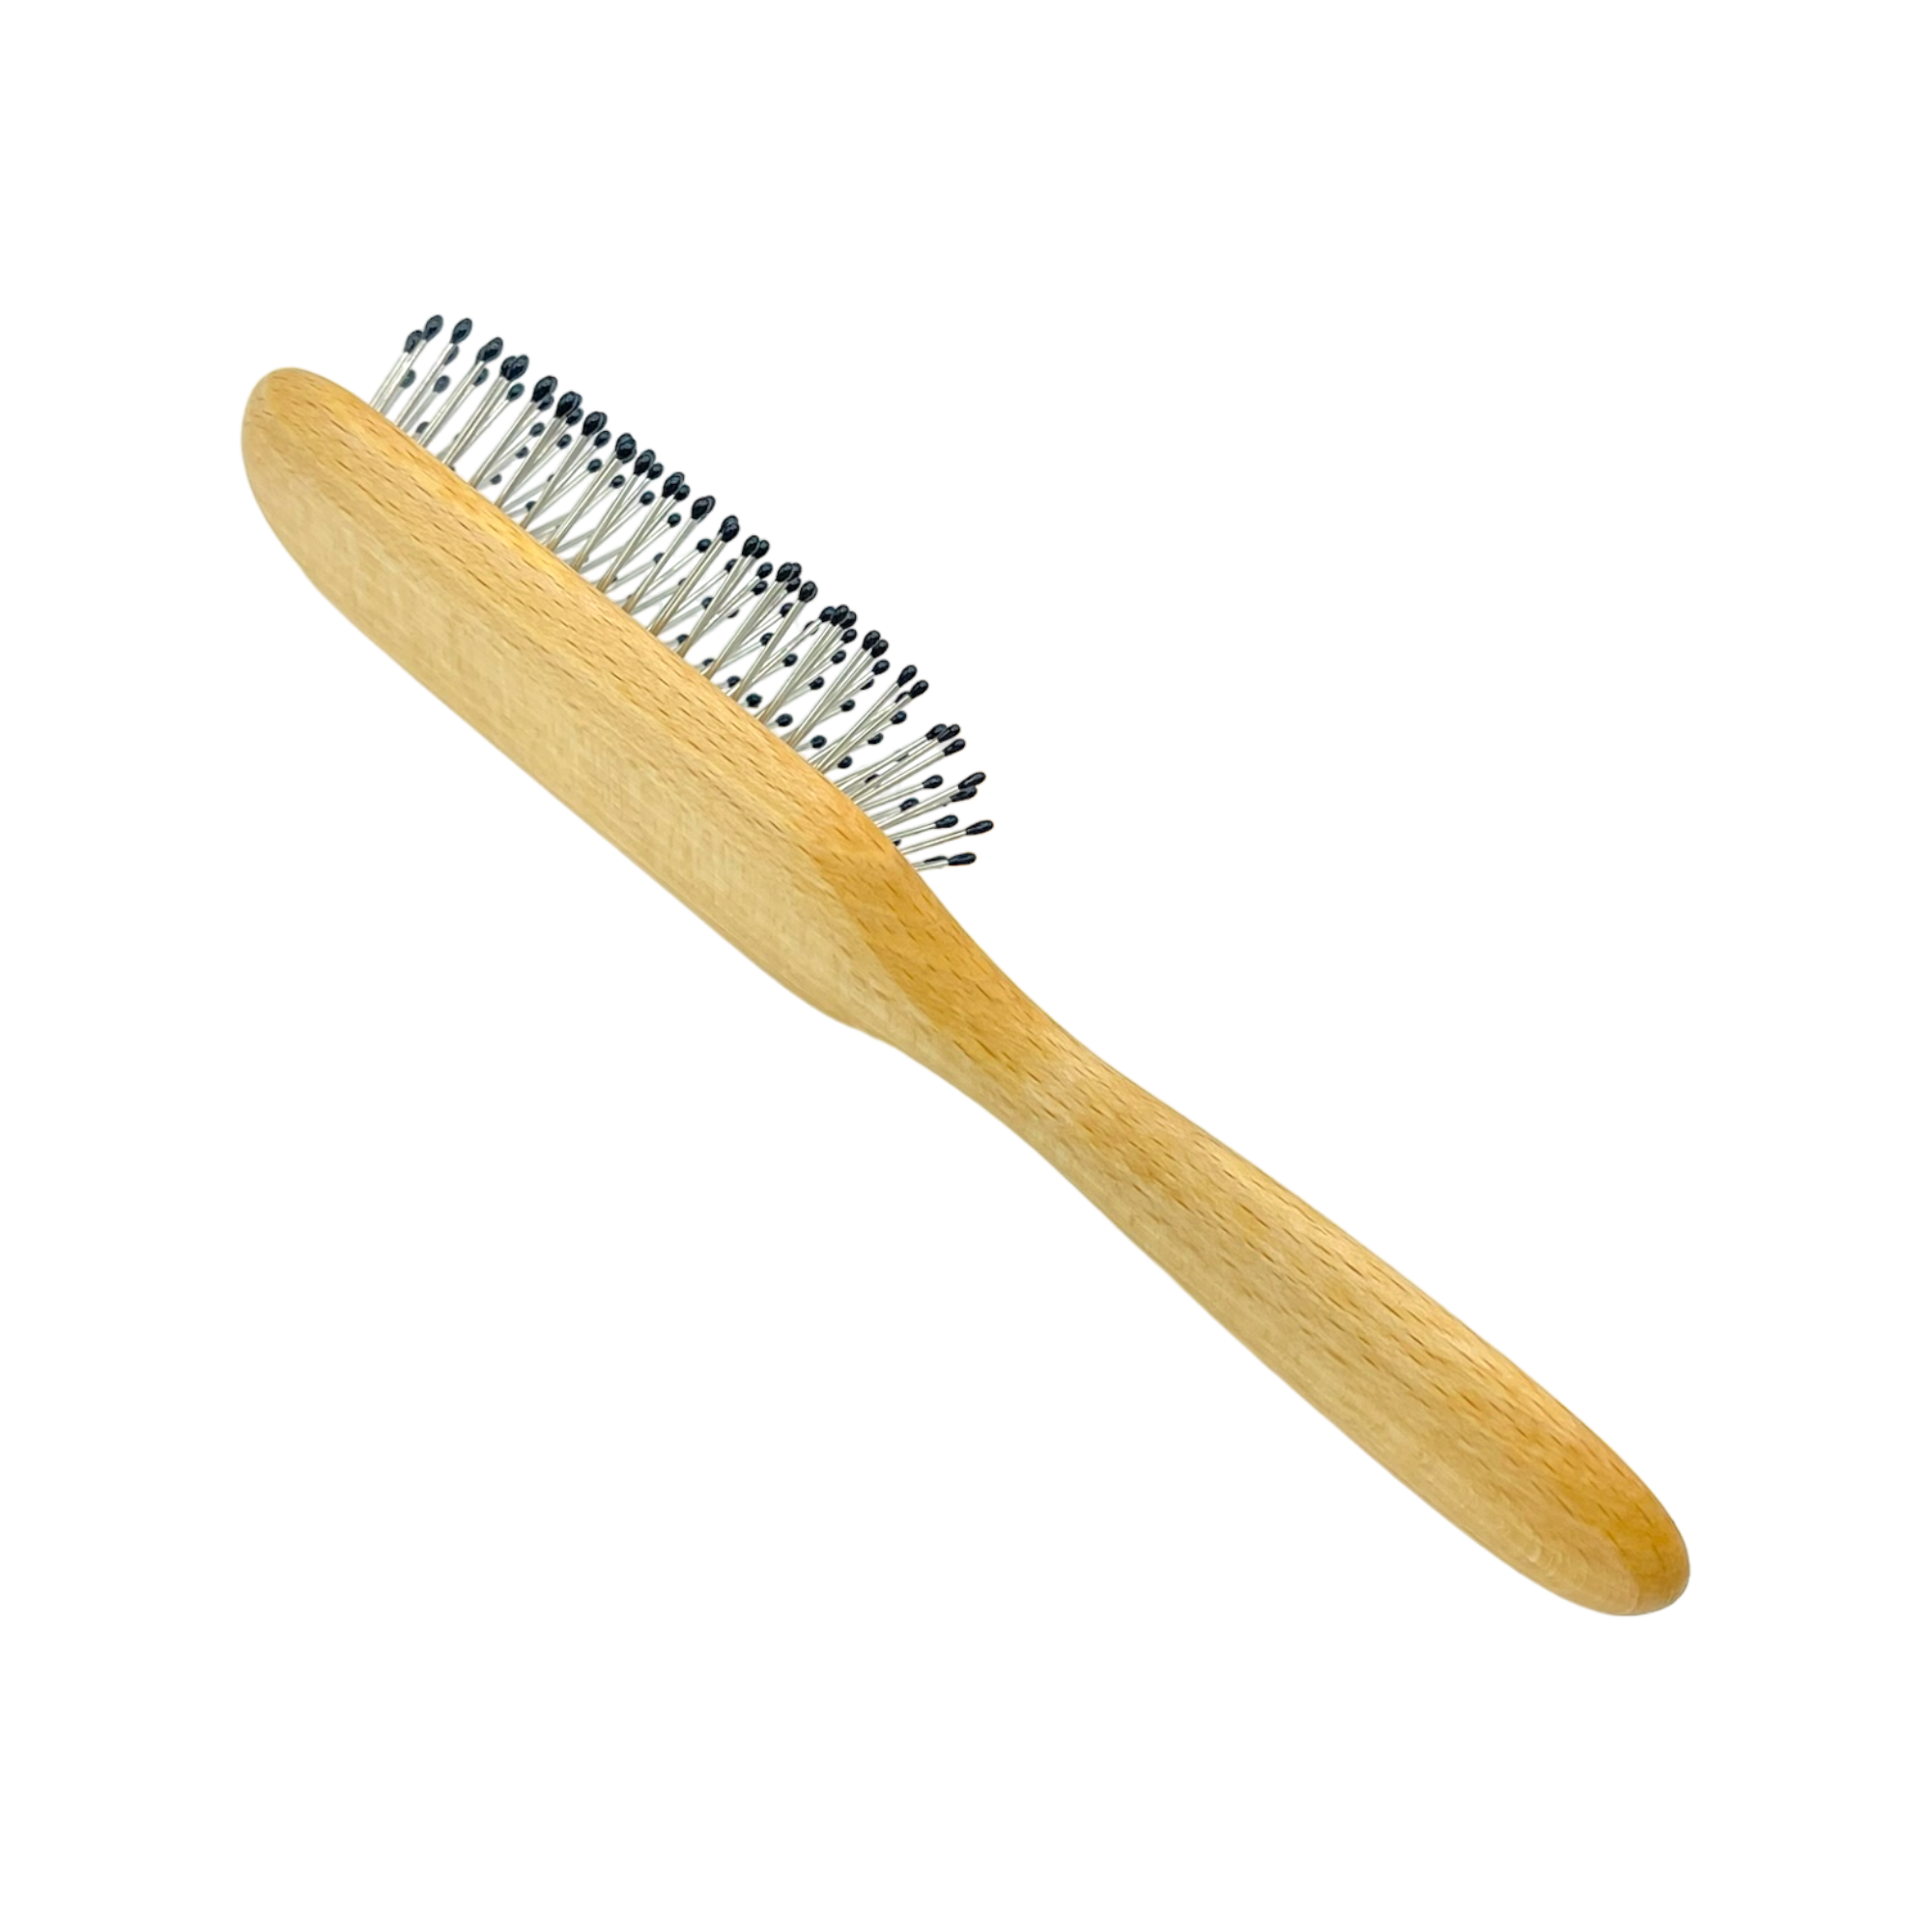 Dural Beech wood rubber cushion hair brush with steel pins and ball tips